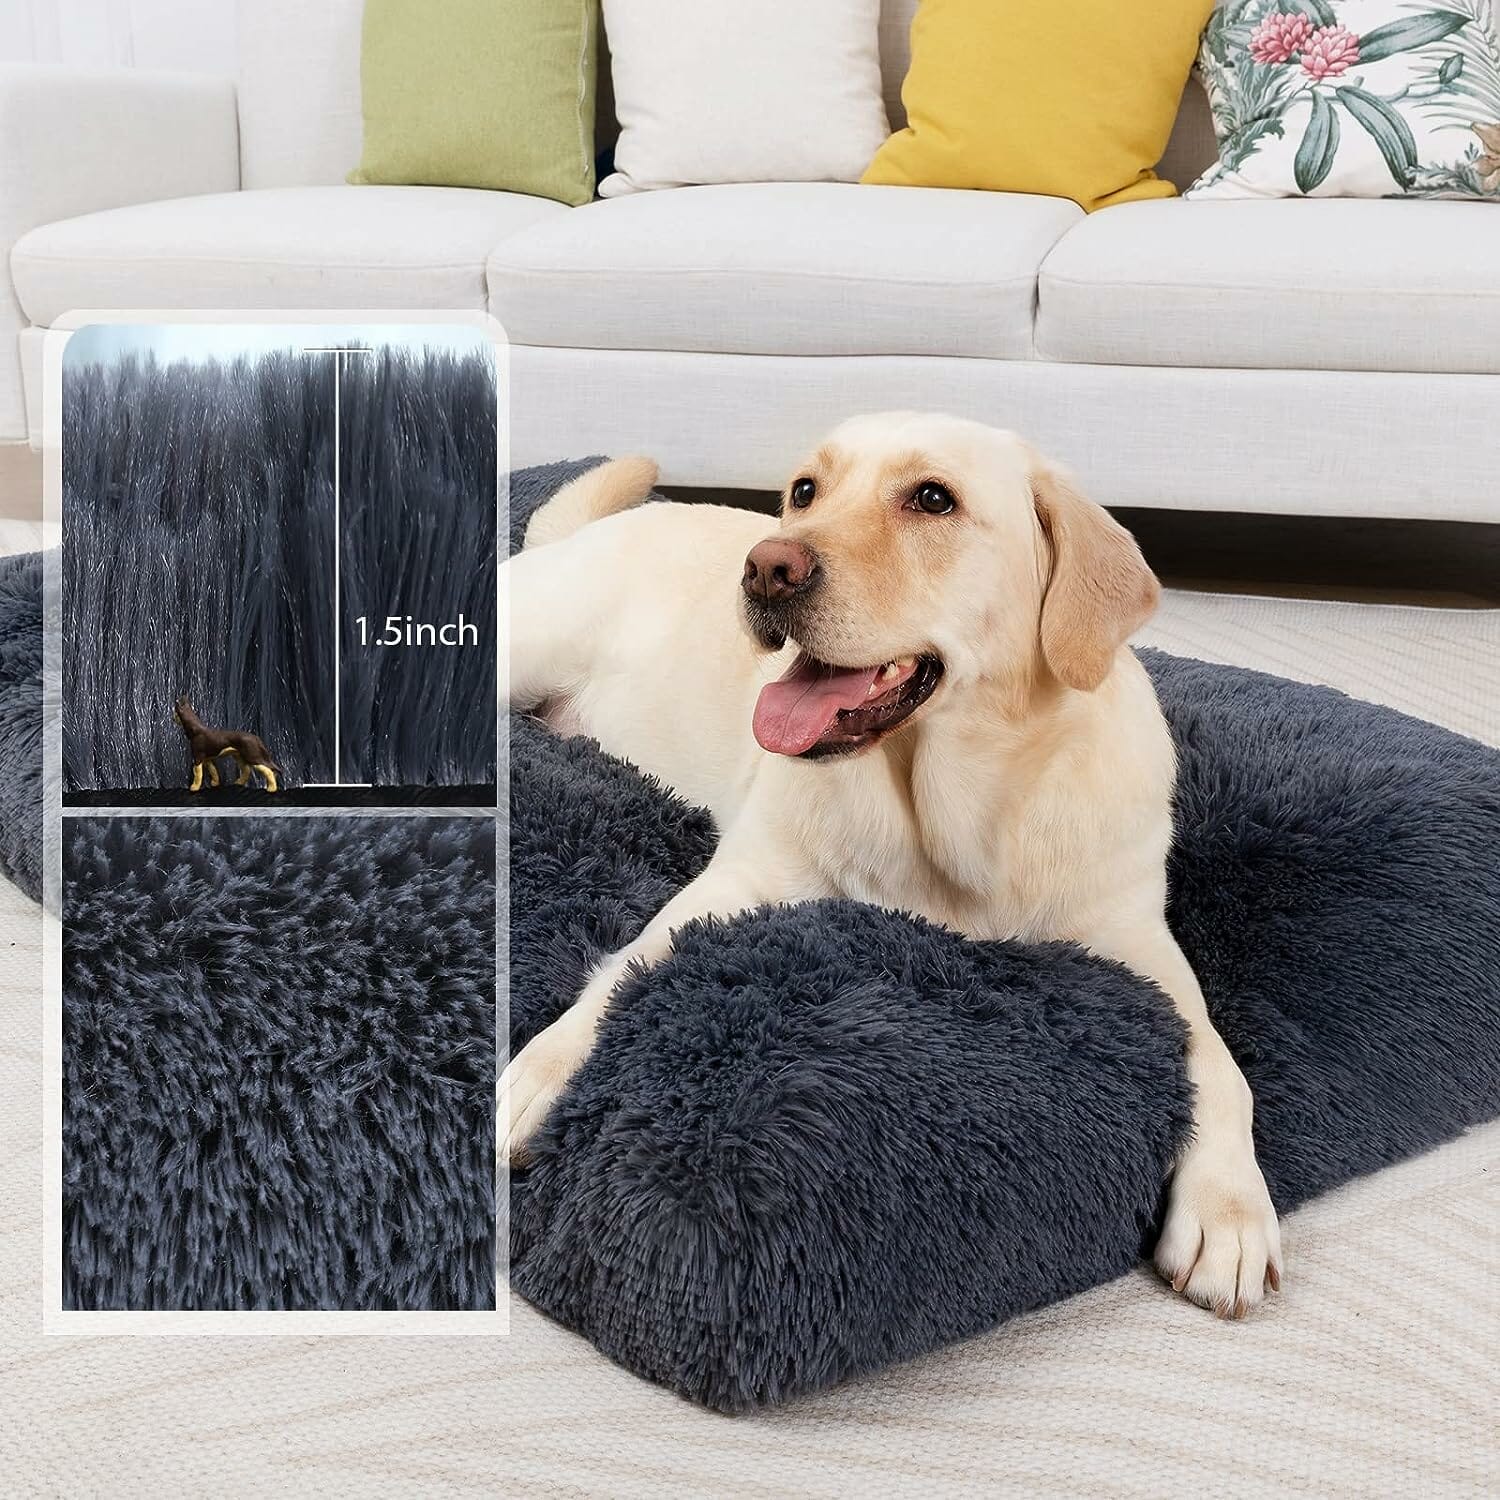 Champets Washable Dog Bed Review